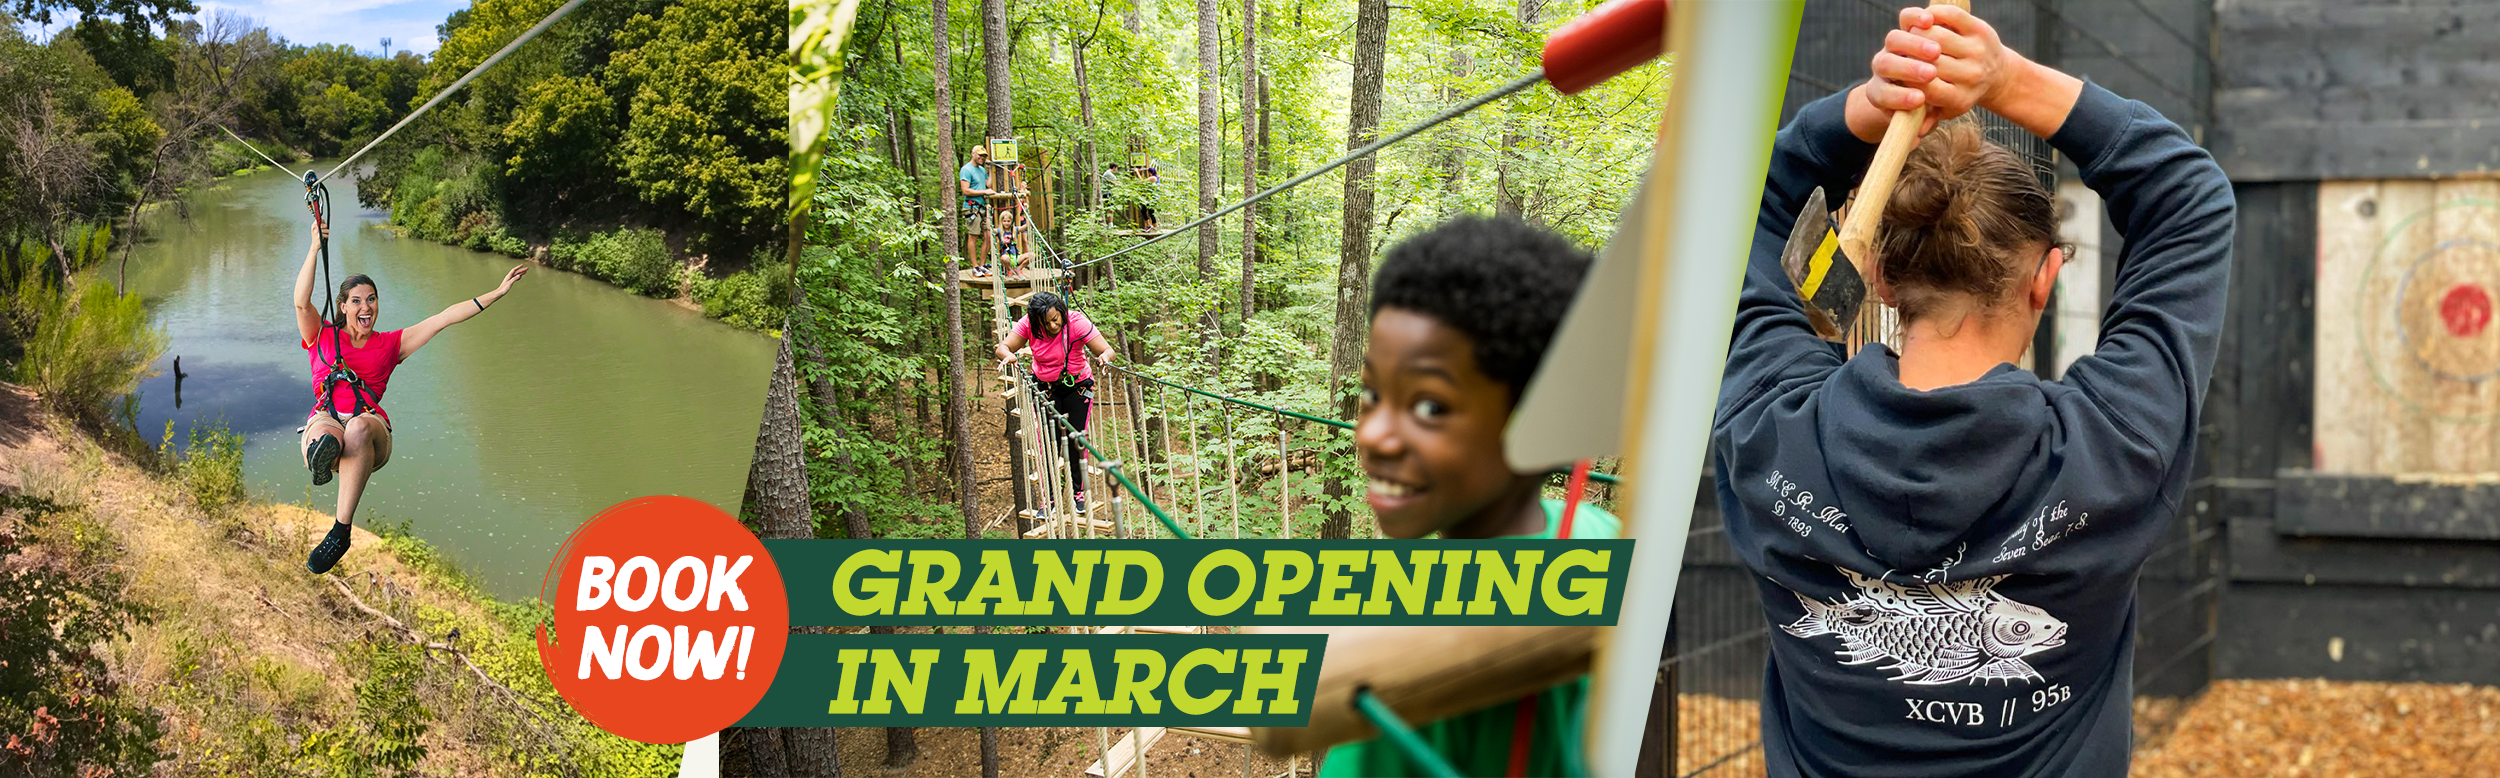 Book Now - Grand Opening in March